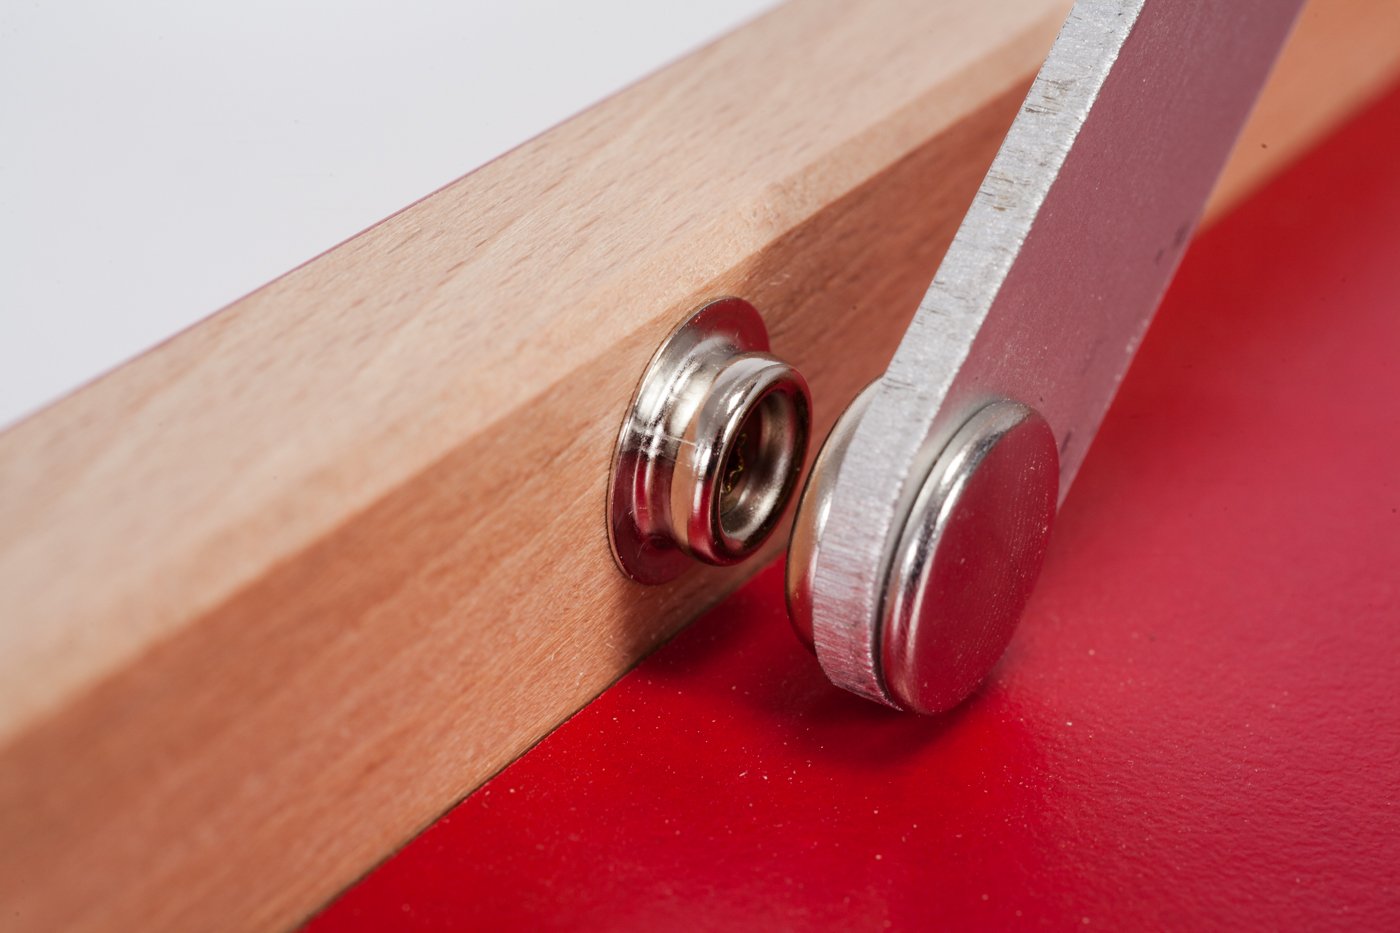 Closeup of metal push button inside the  wooden frame of Mini ping-pong table red "The hot chili"